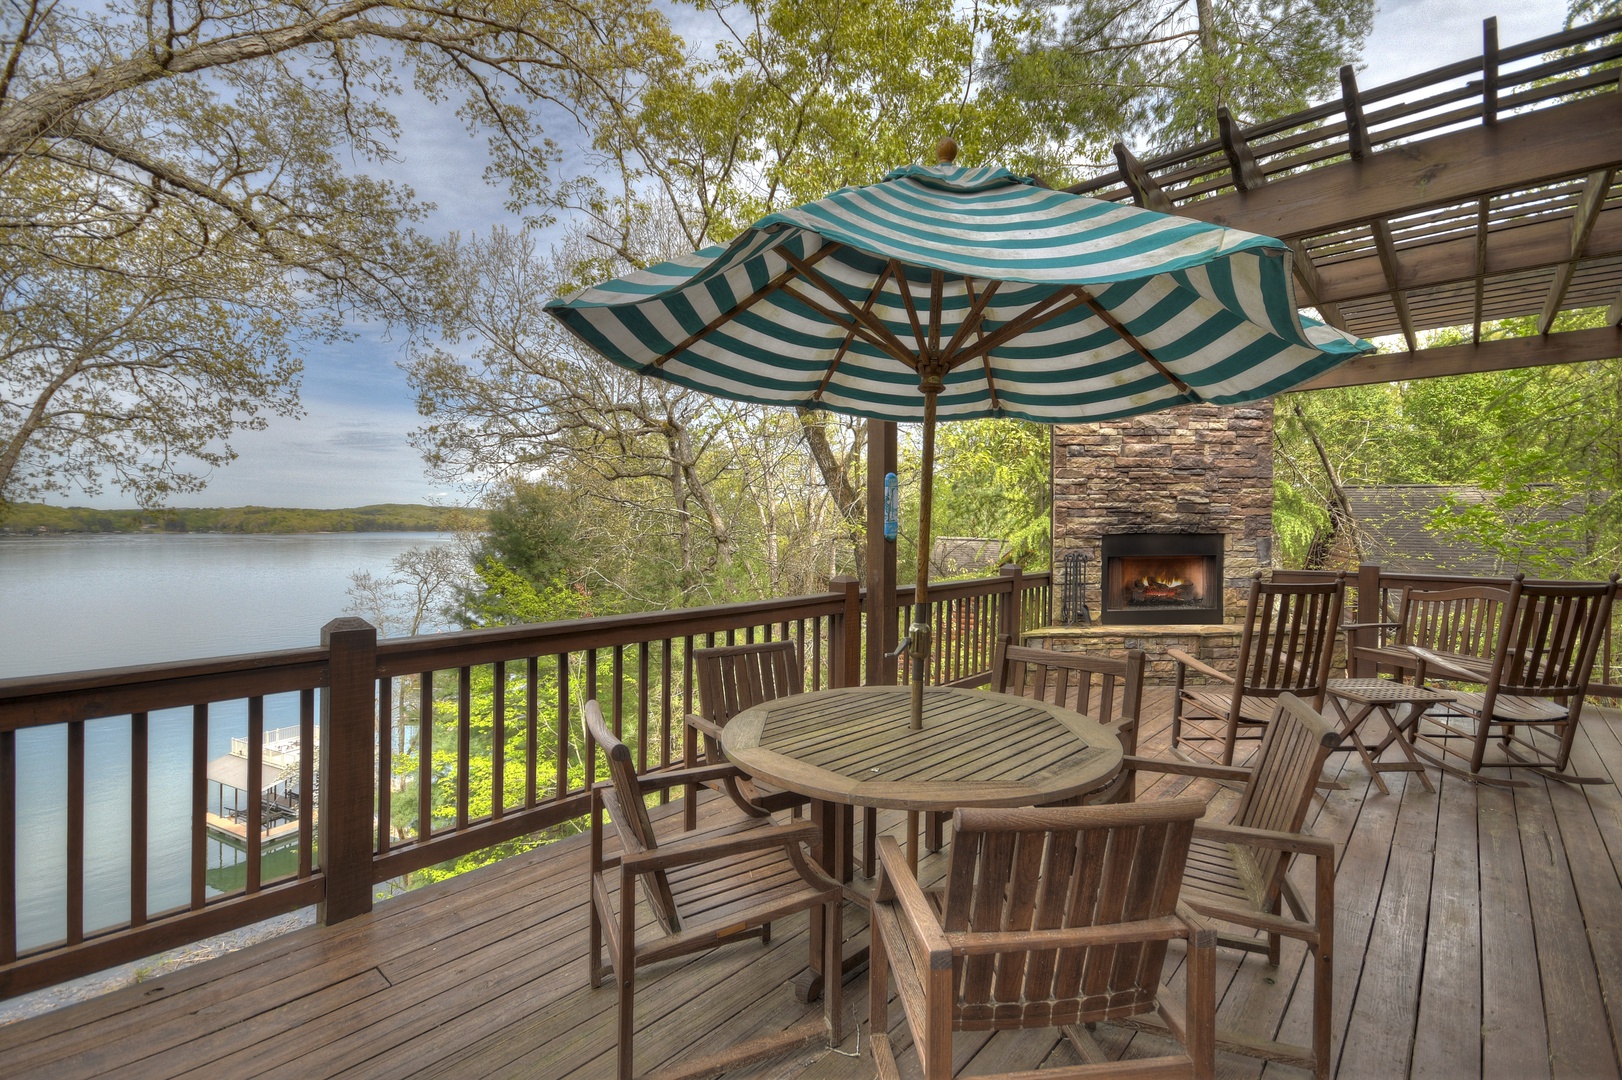 When In Rome- Deck with table and chair seating, fireplace and a lake view